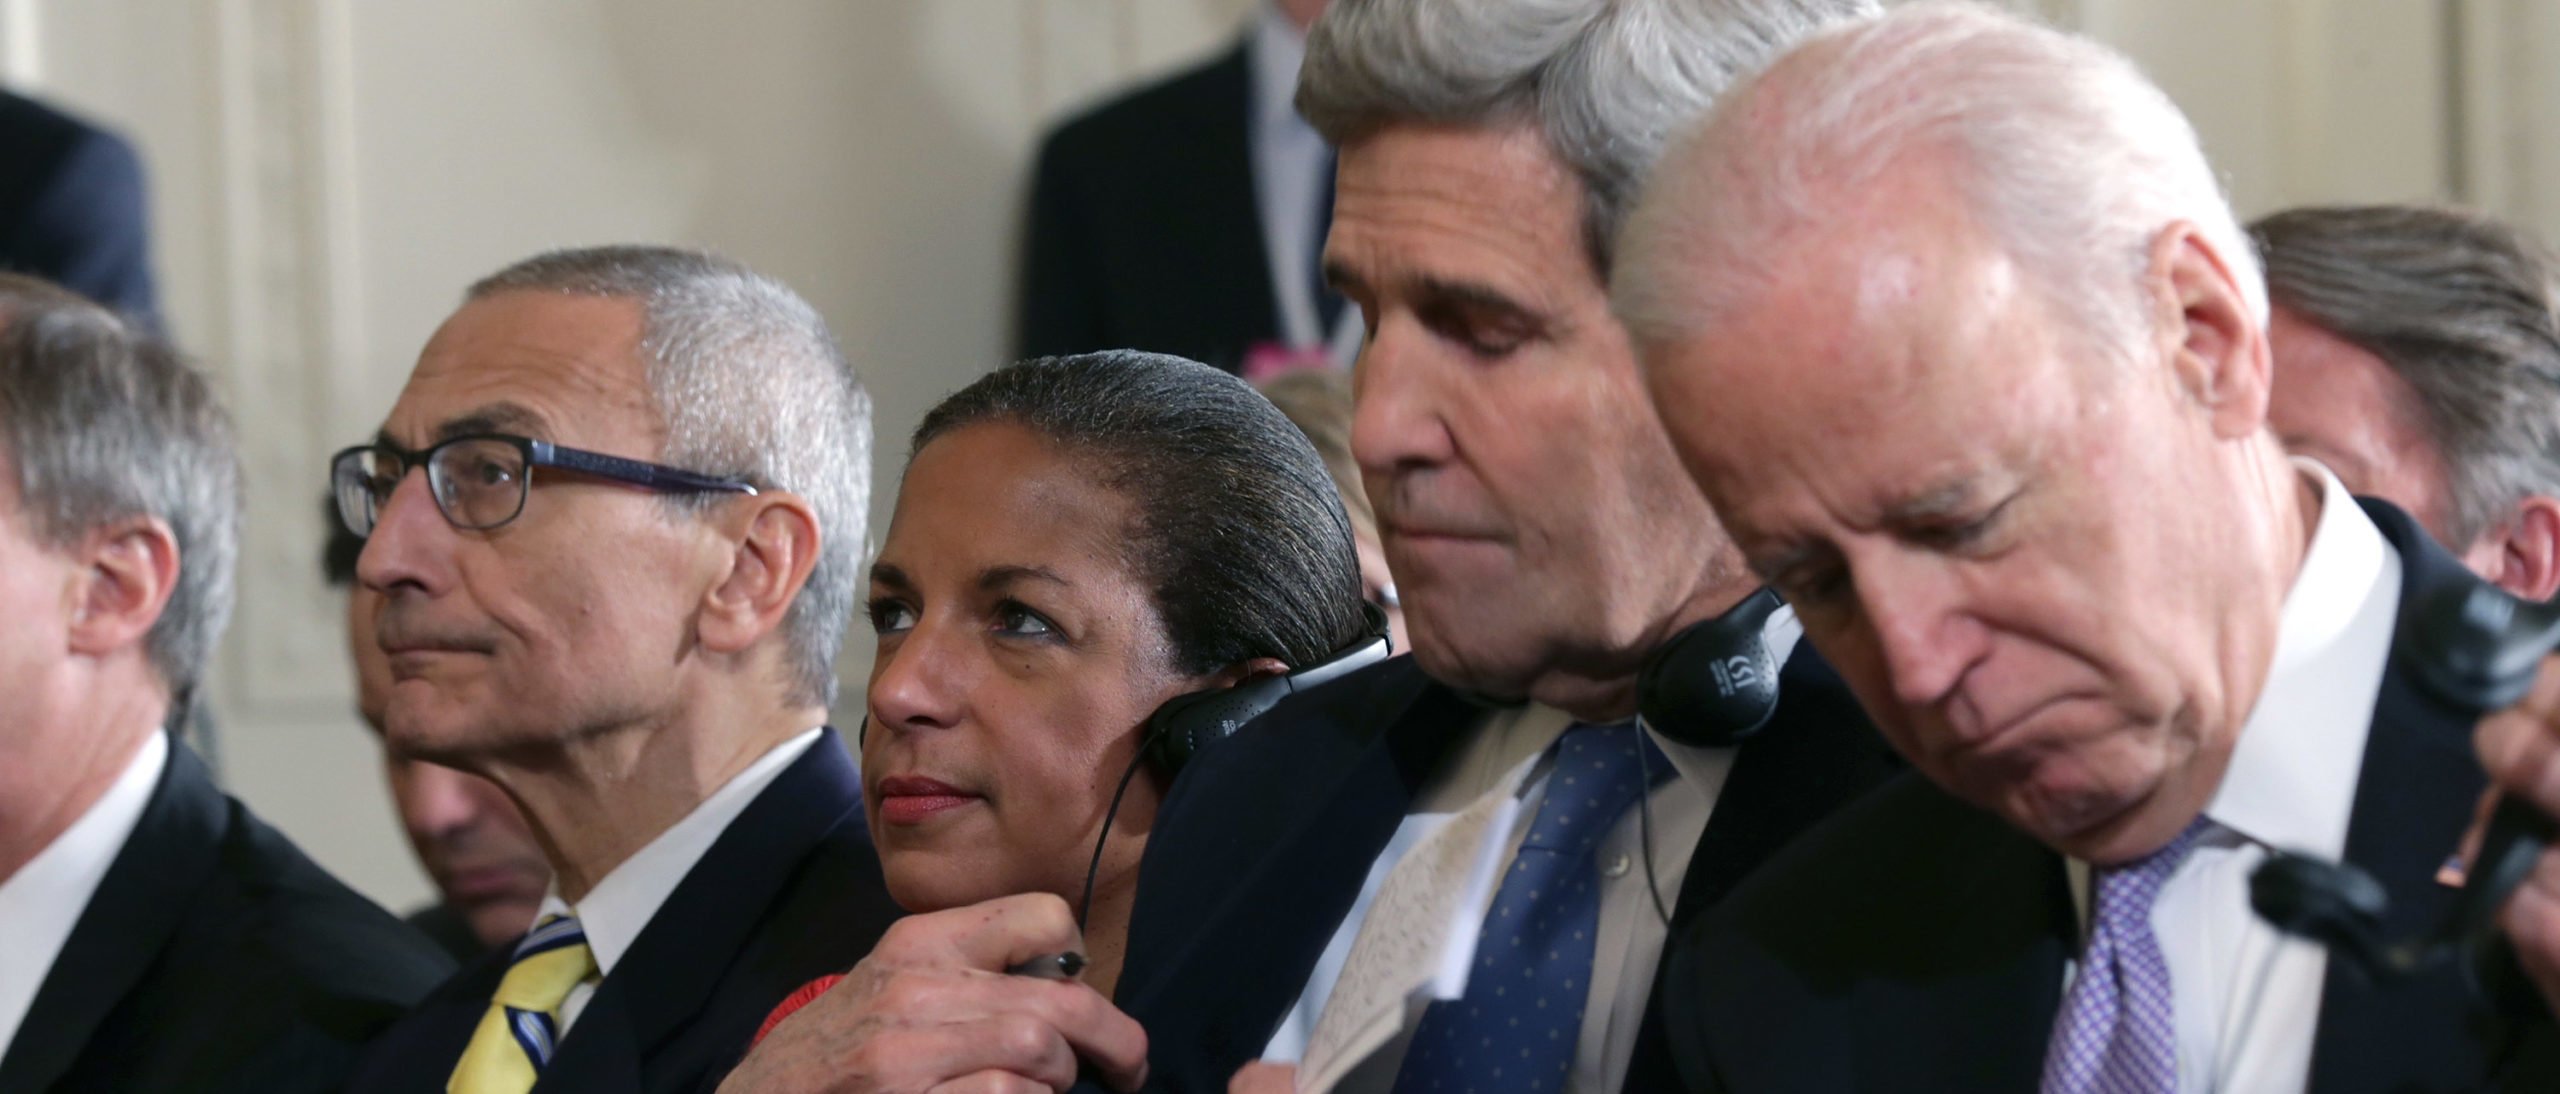 DAVID BLACKMON: John Kerry Tries Out A New Climate Catchphrase To Ratchet Up The Fear